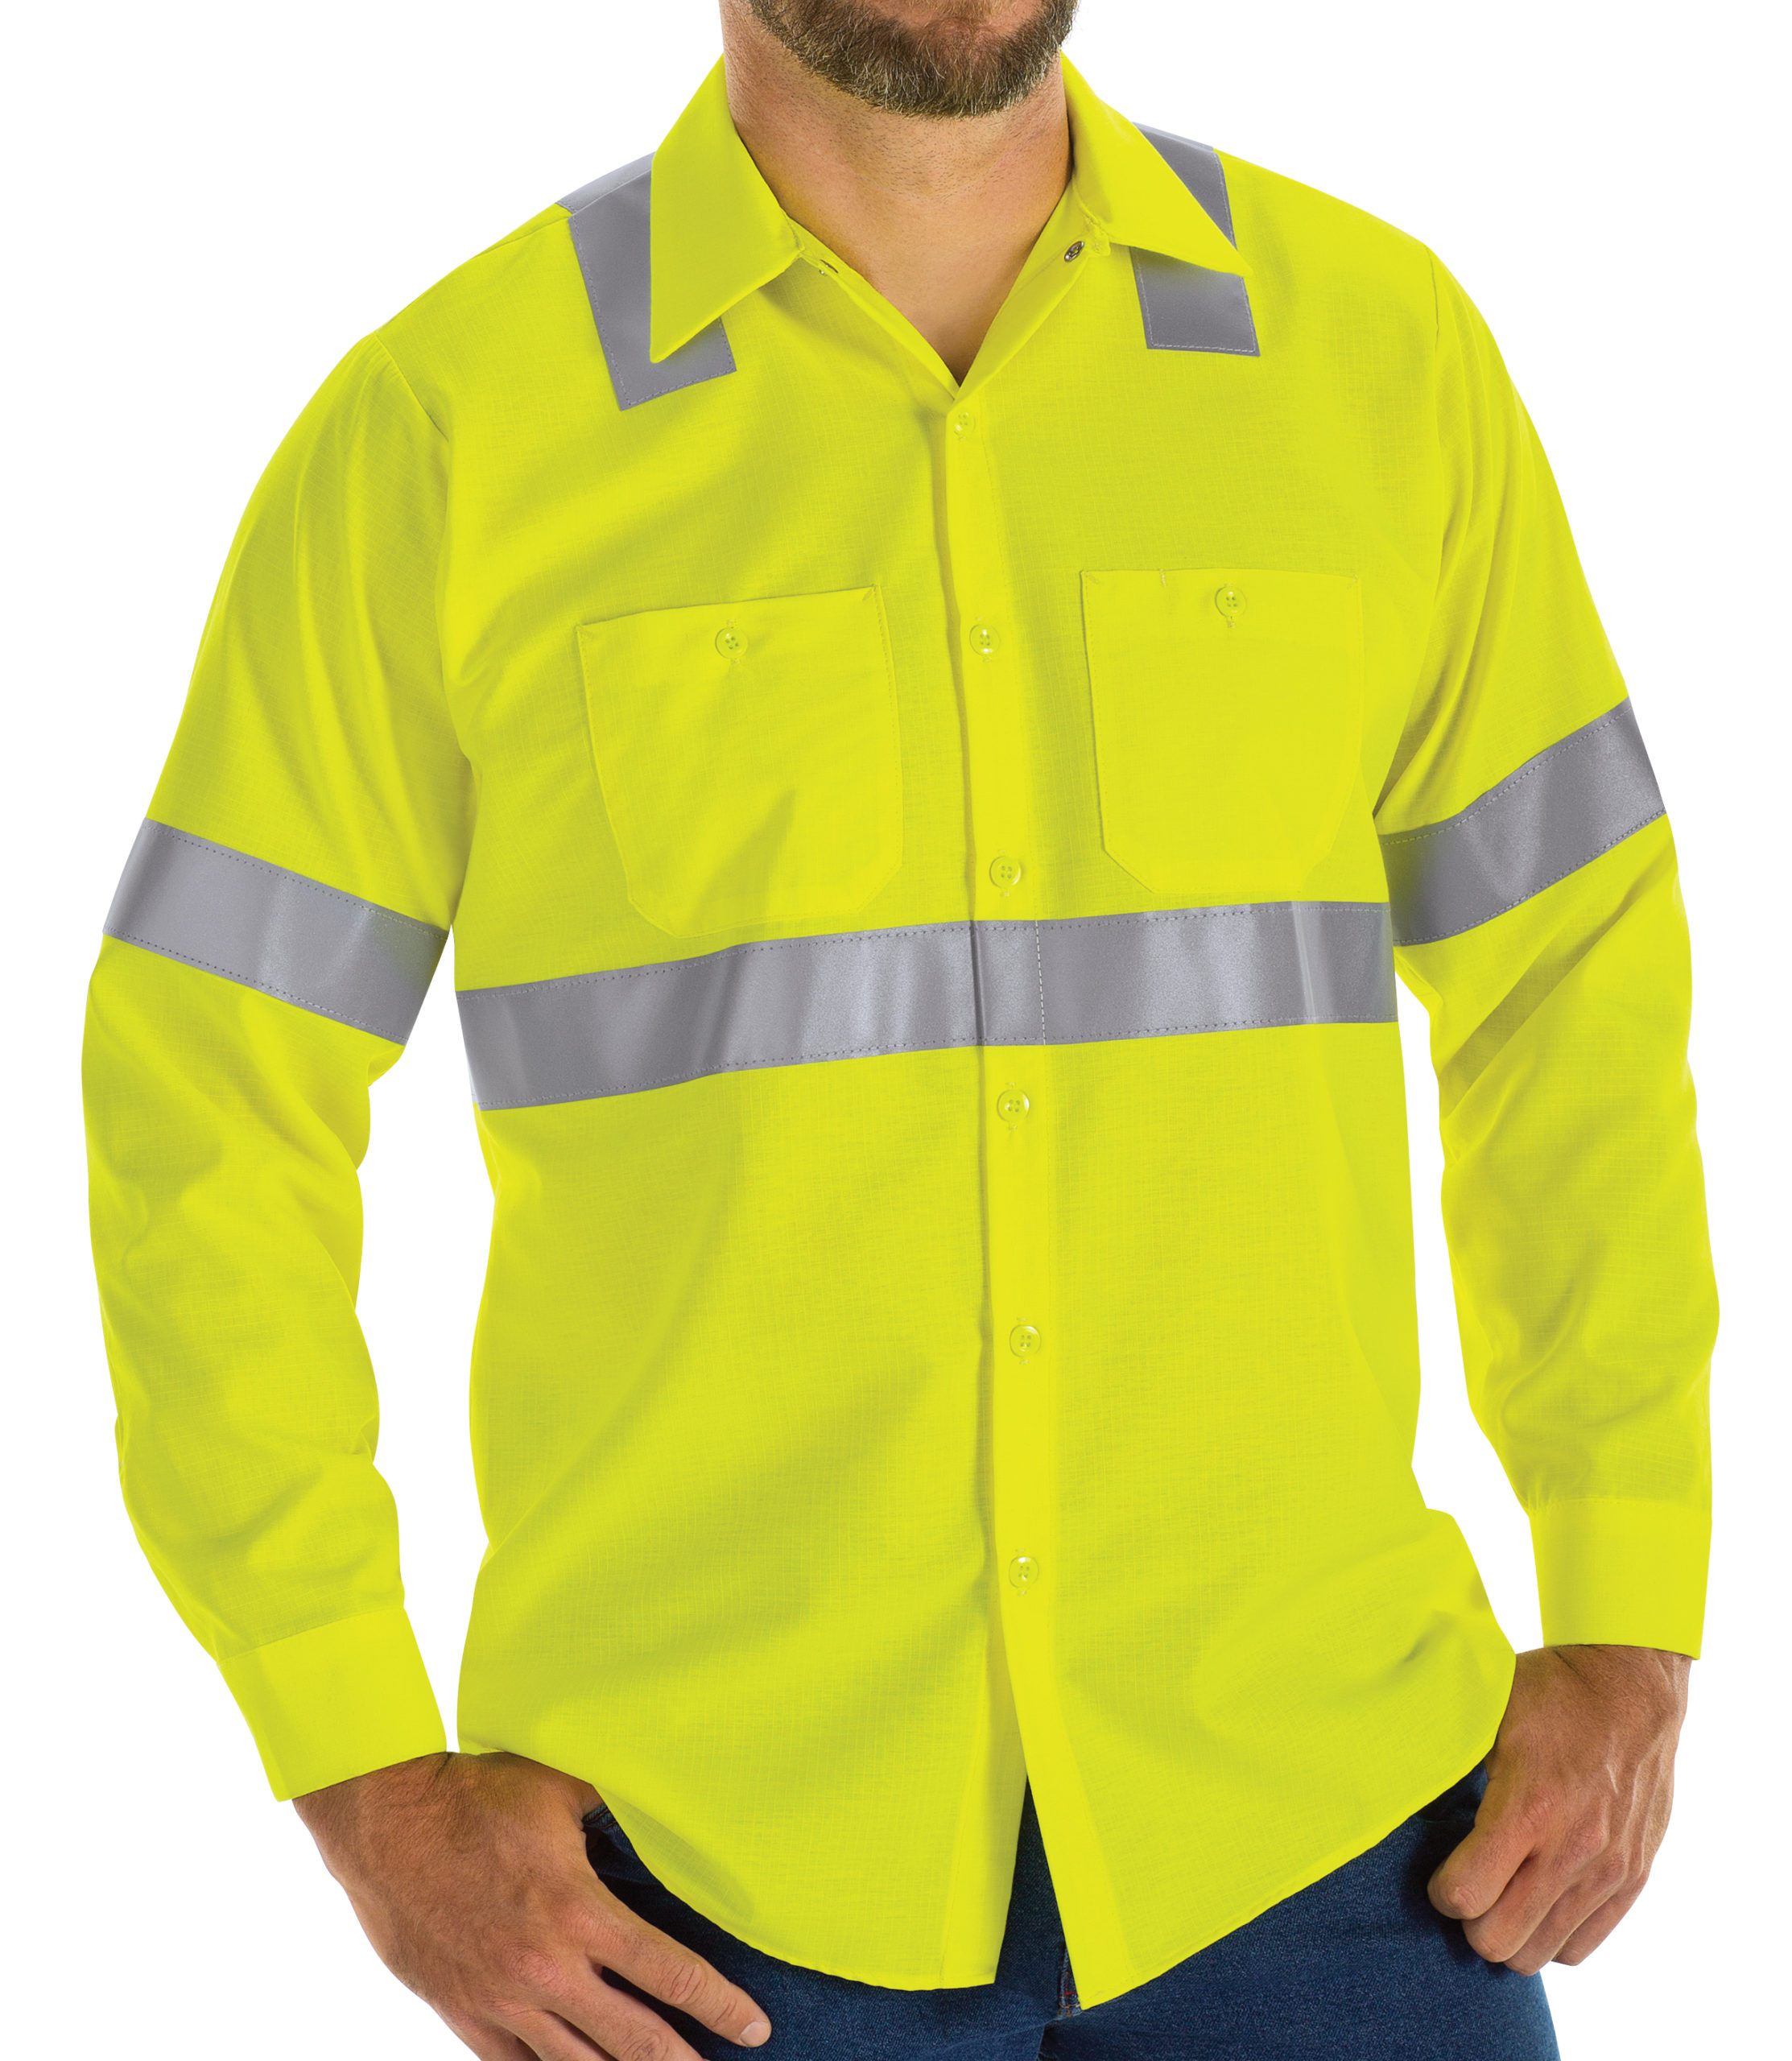 Buy > high visibility reflective shirts > in stock